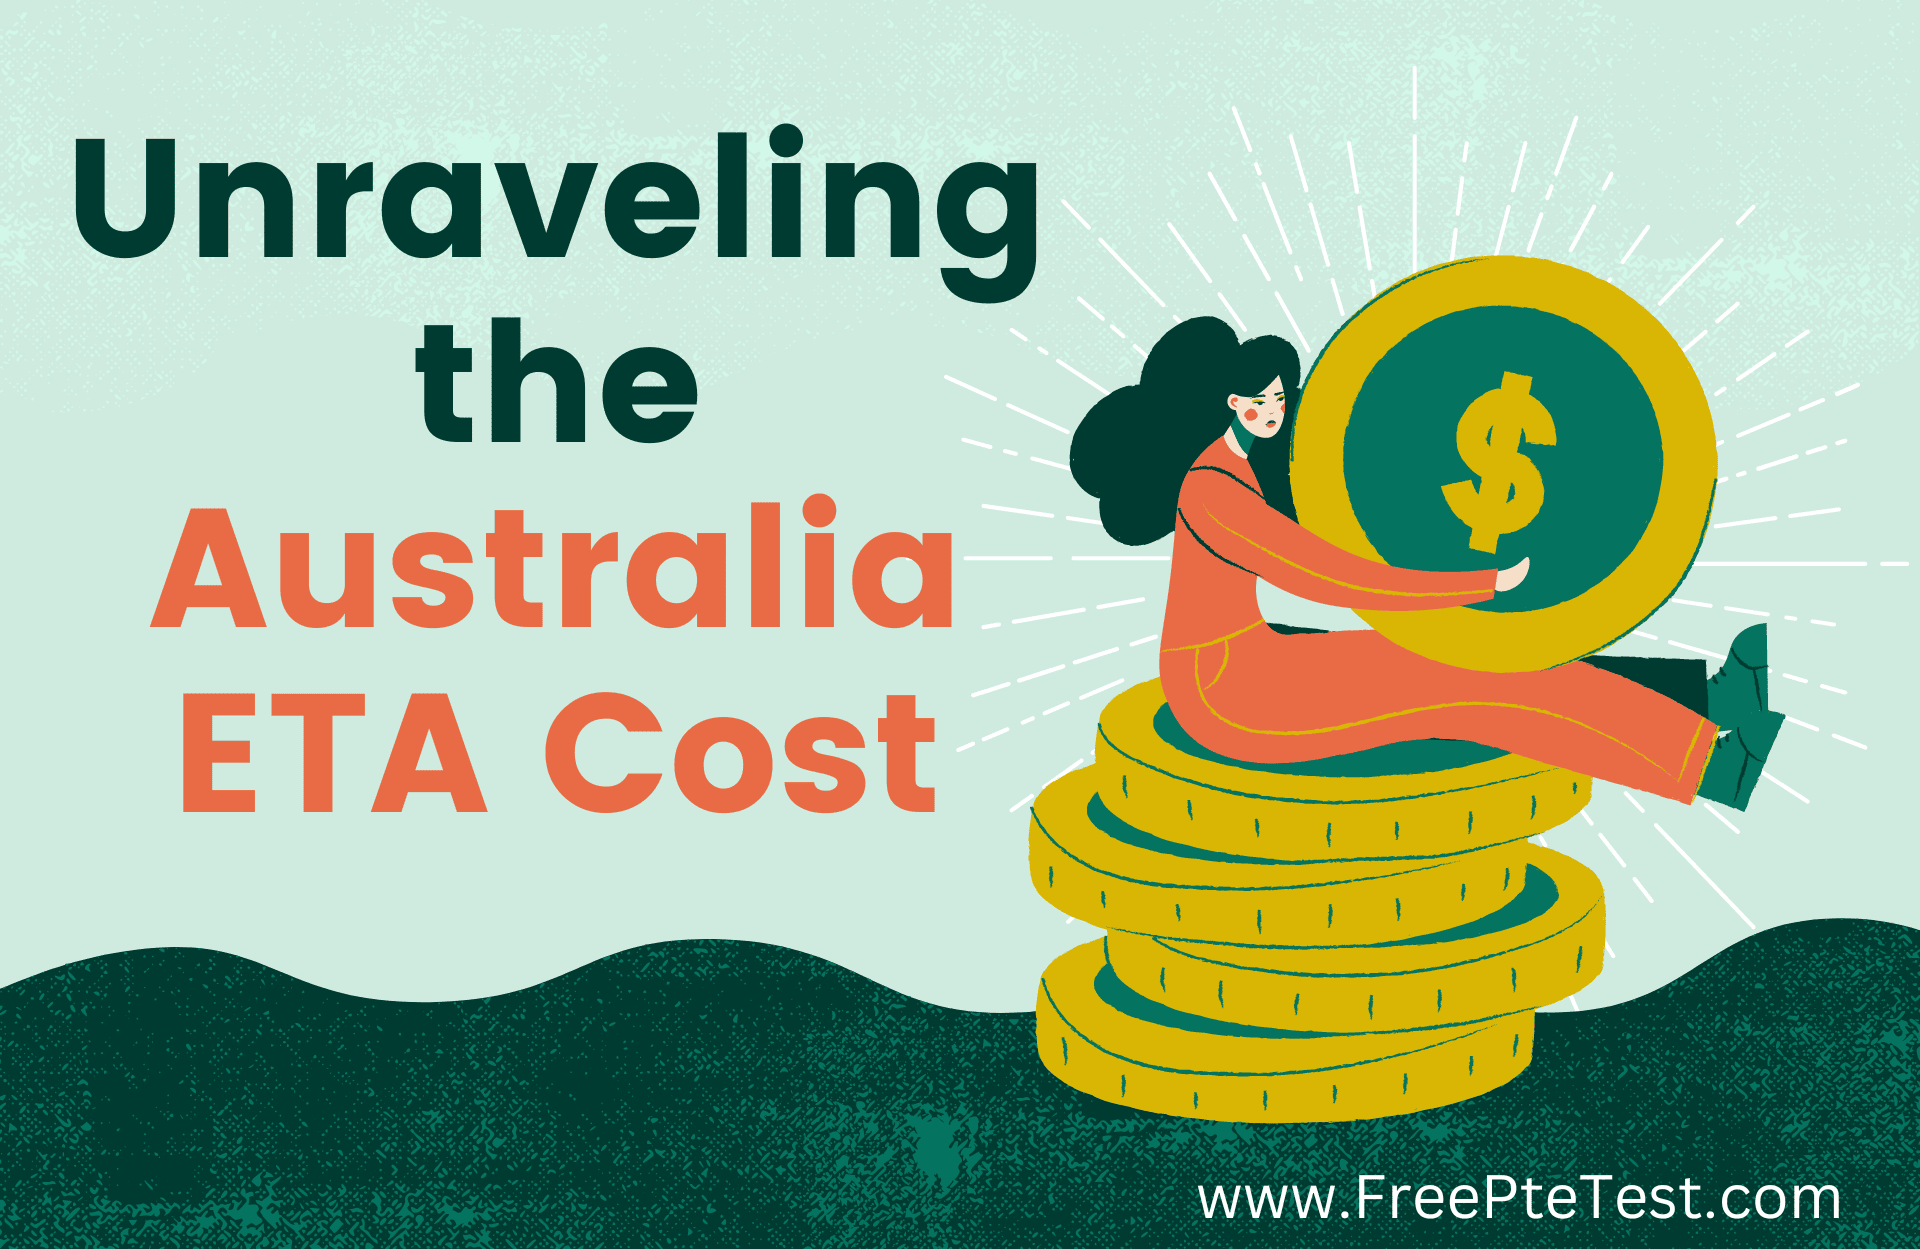 You are currently viewing Unraveling the Australia ETA Cost